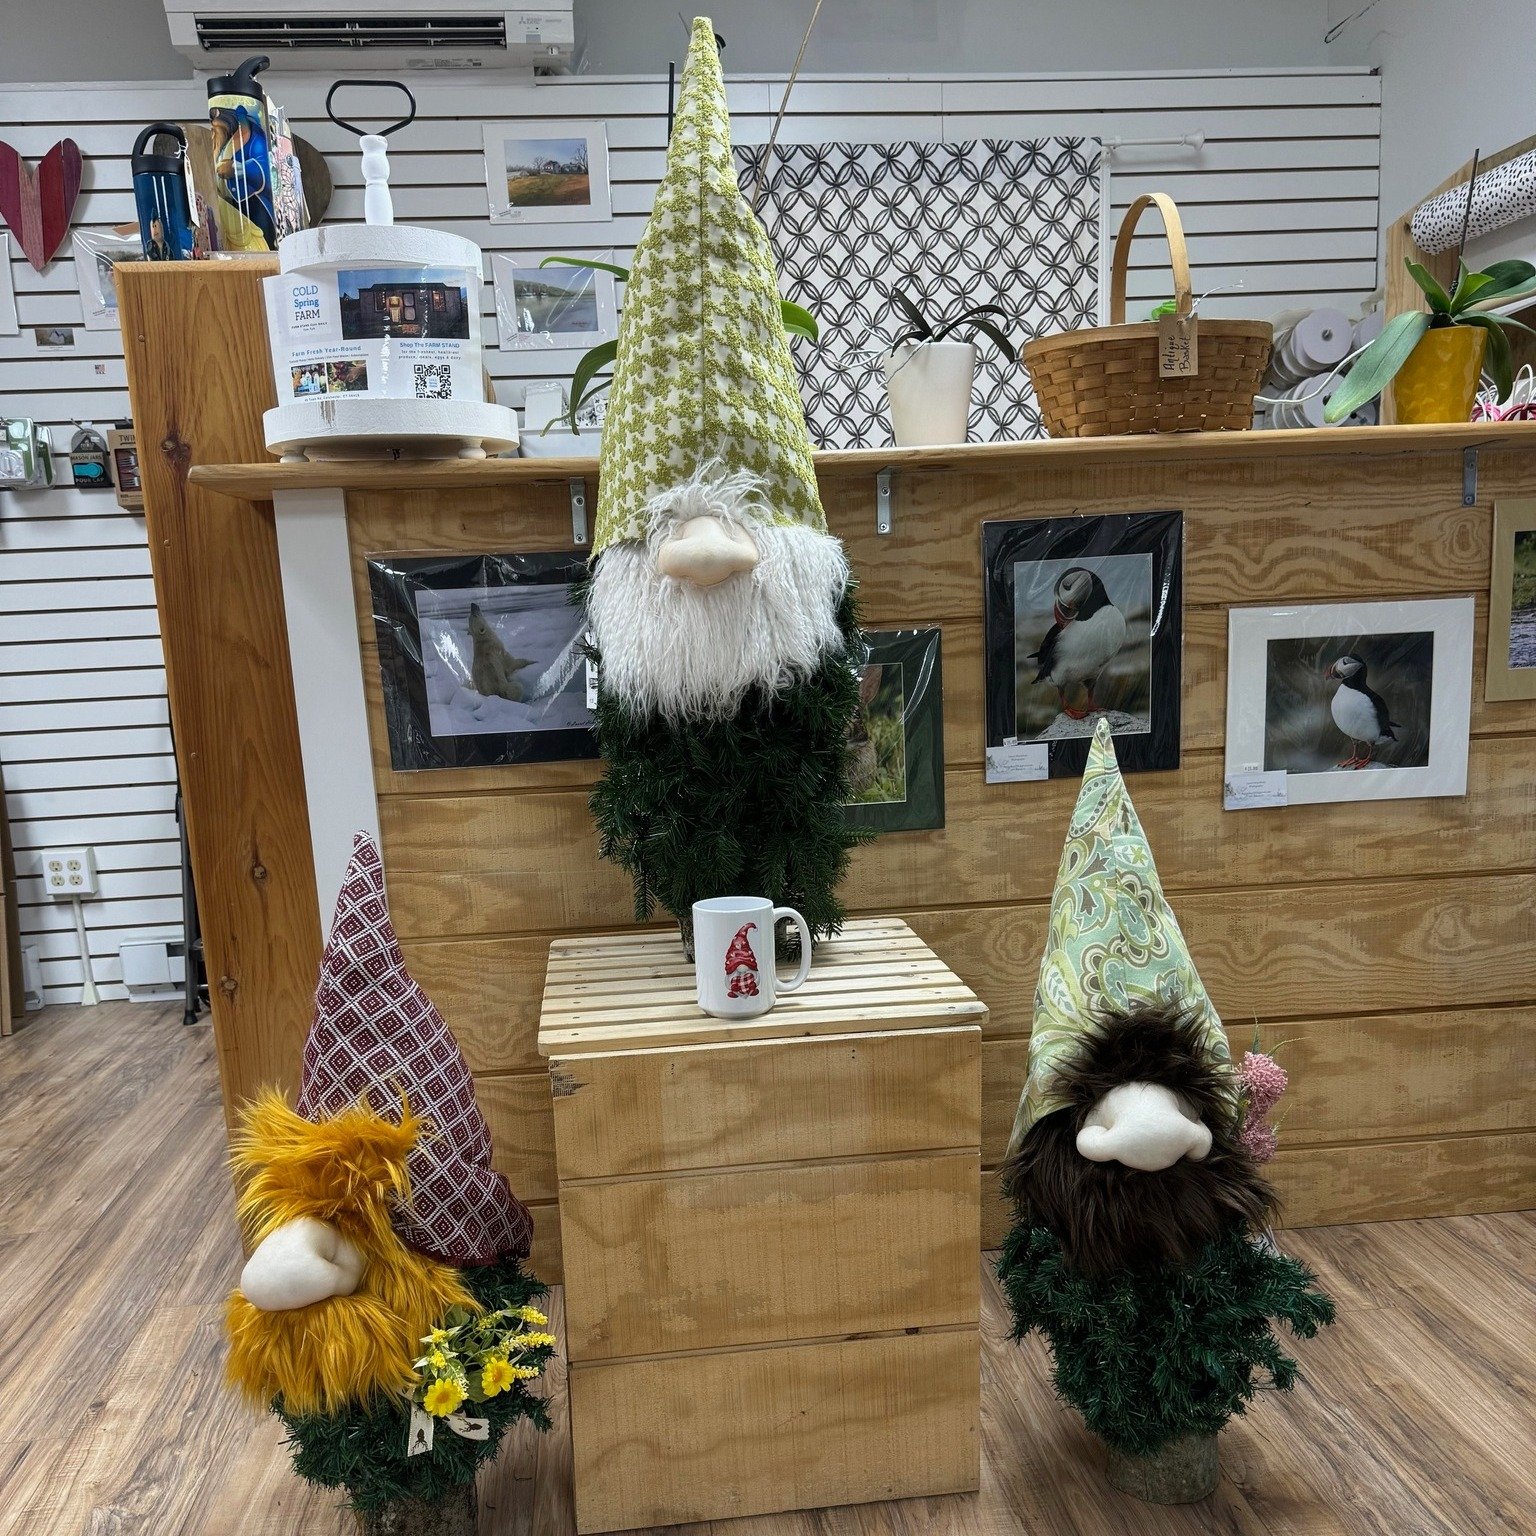 We have some new guardians in the gift shop!  Melinda from Majoch Marketplace dropped off these three gnomes which are currently available for purchase.